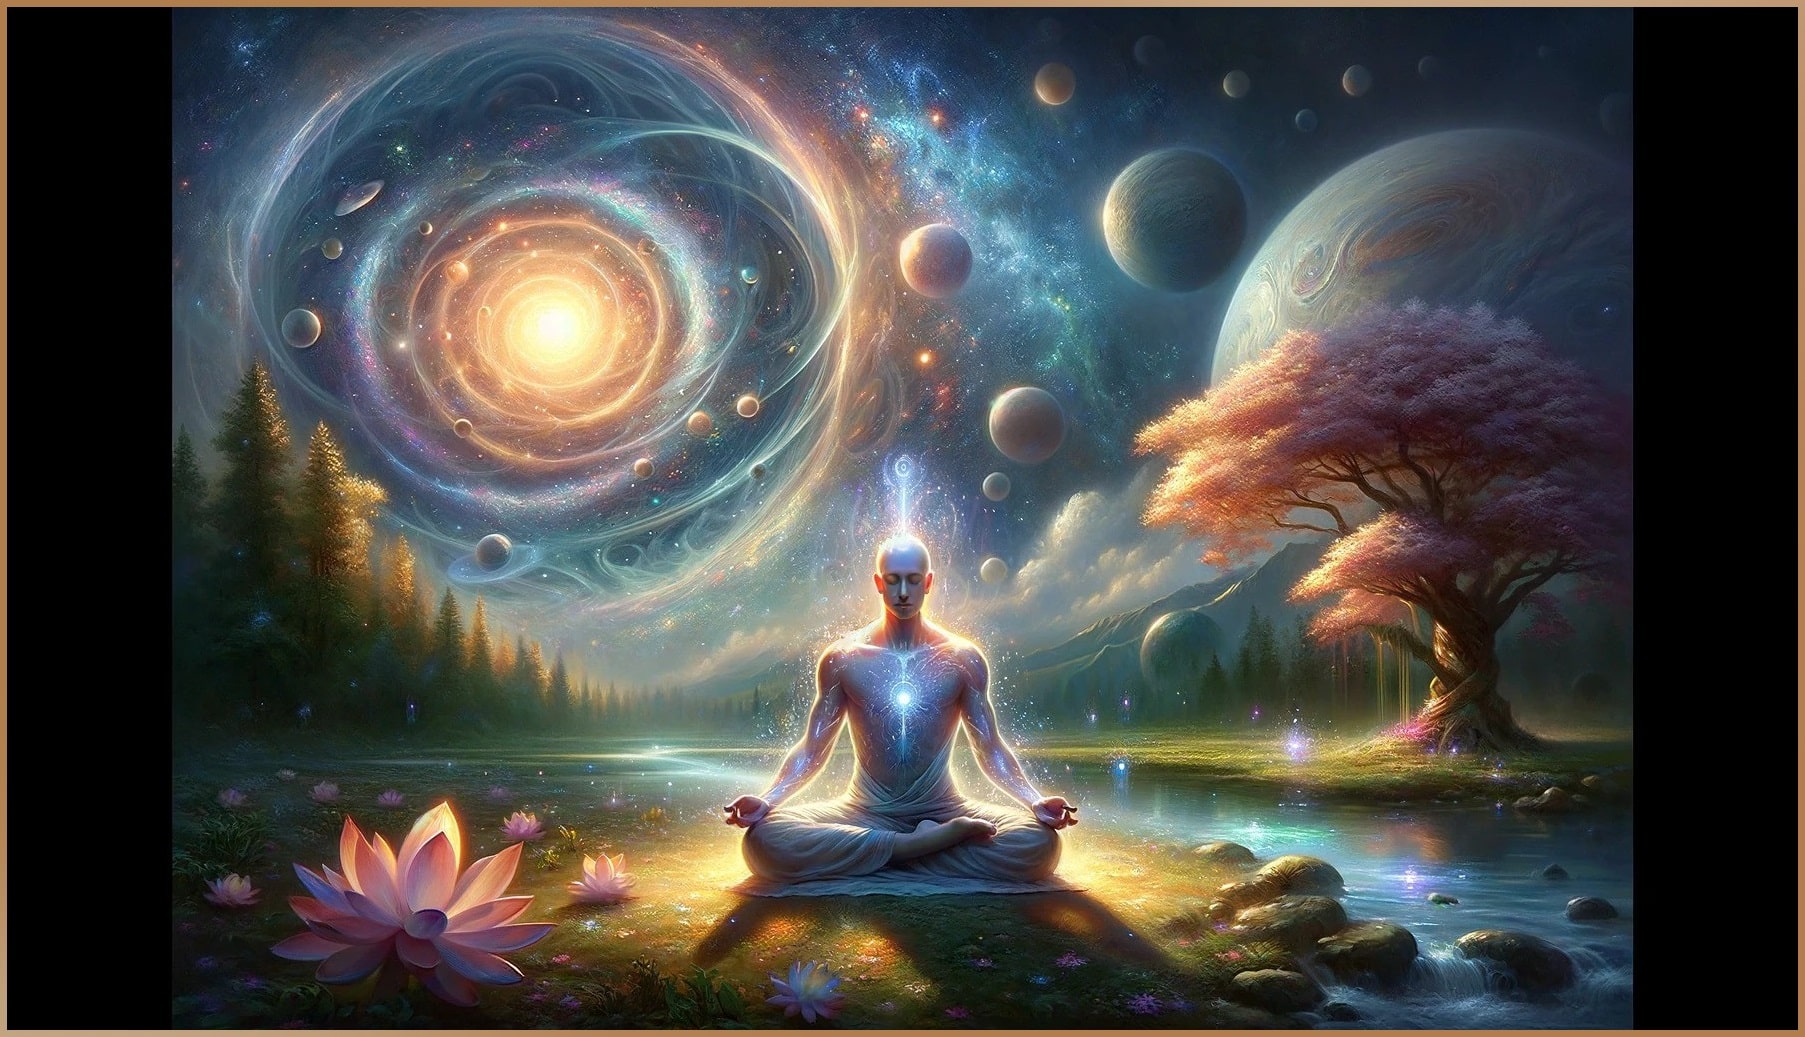 A contemplative figure meditating in nature, surrounded by cosmic energy, representing Ten Million Day's power to transform desires into inner peace.